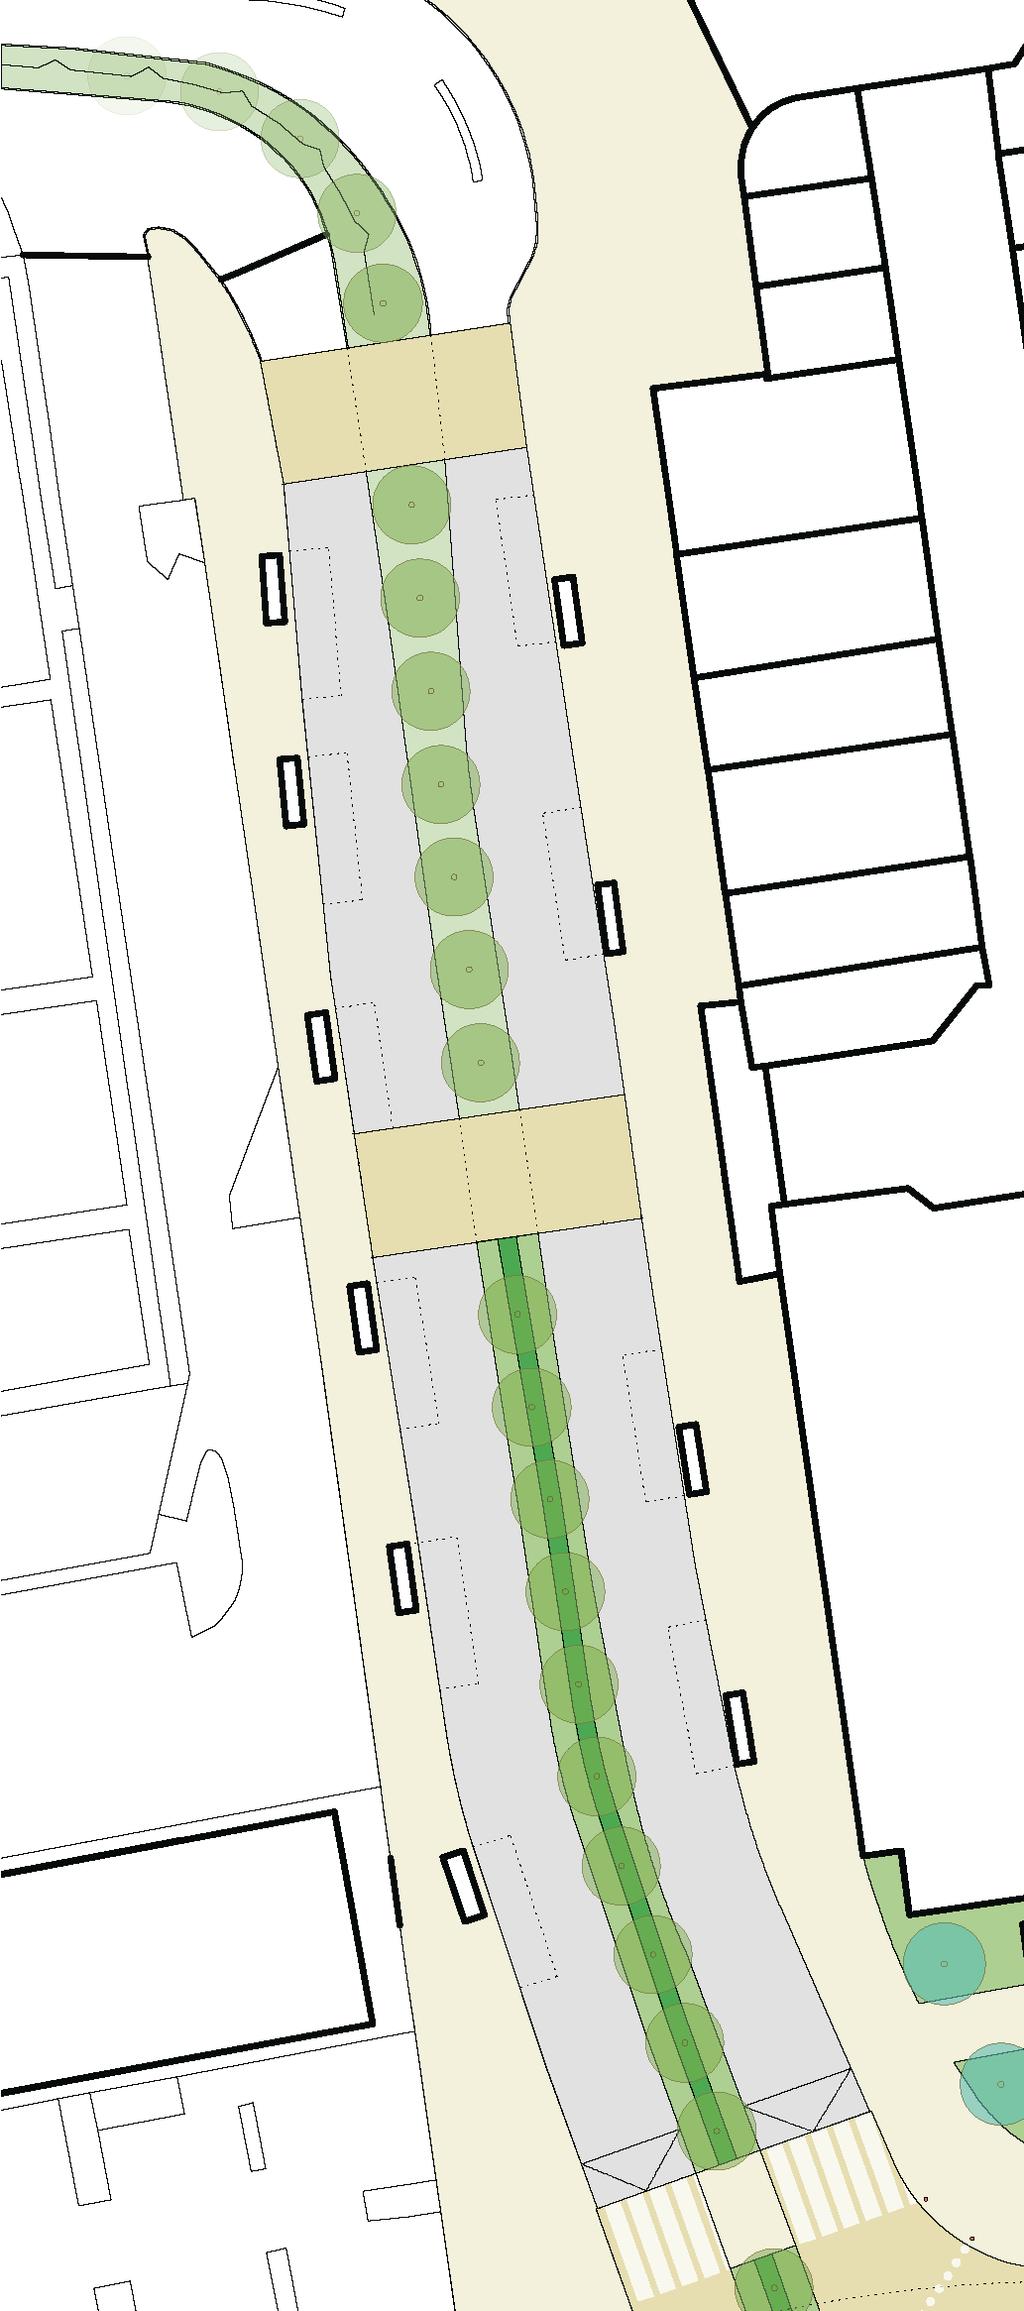 pelican crossing design concept Enhance Bus Station improve environment for users focusing on comfort, generous pedestrian movement space, and safe crossings bus stops positioned to road side and